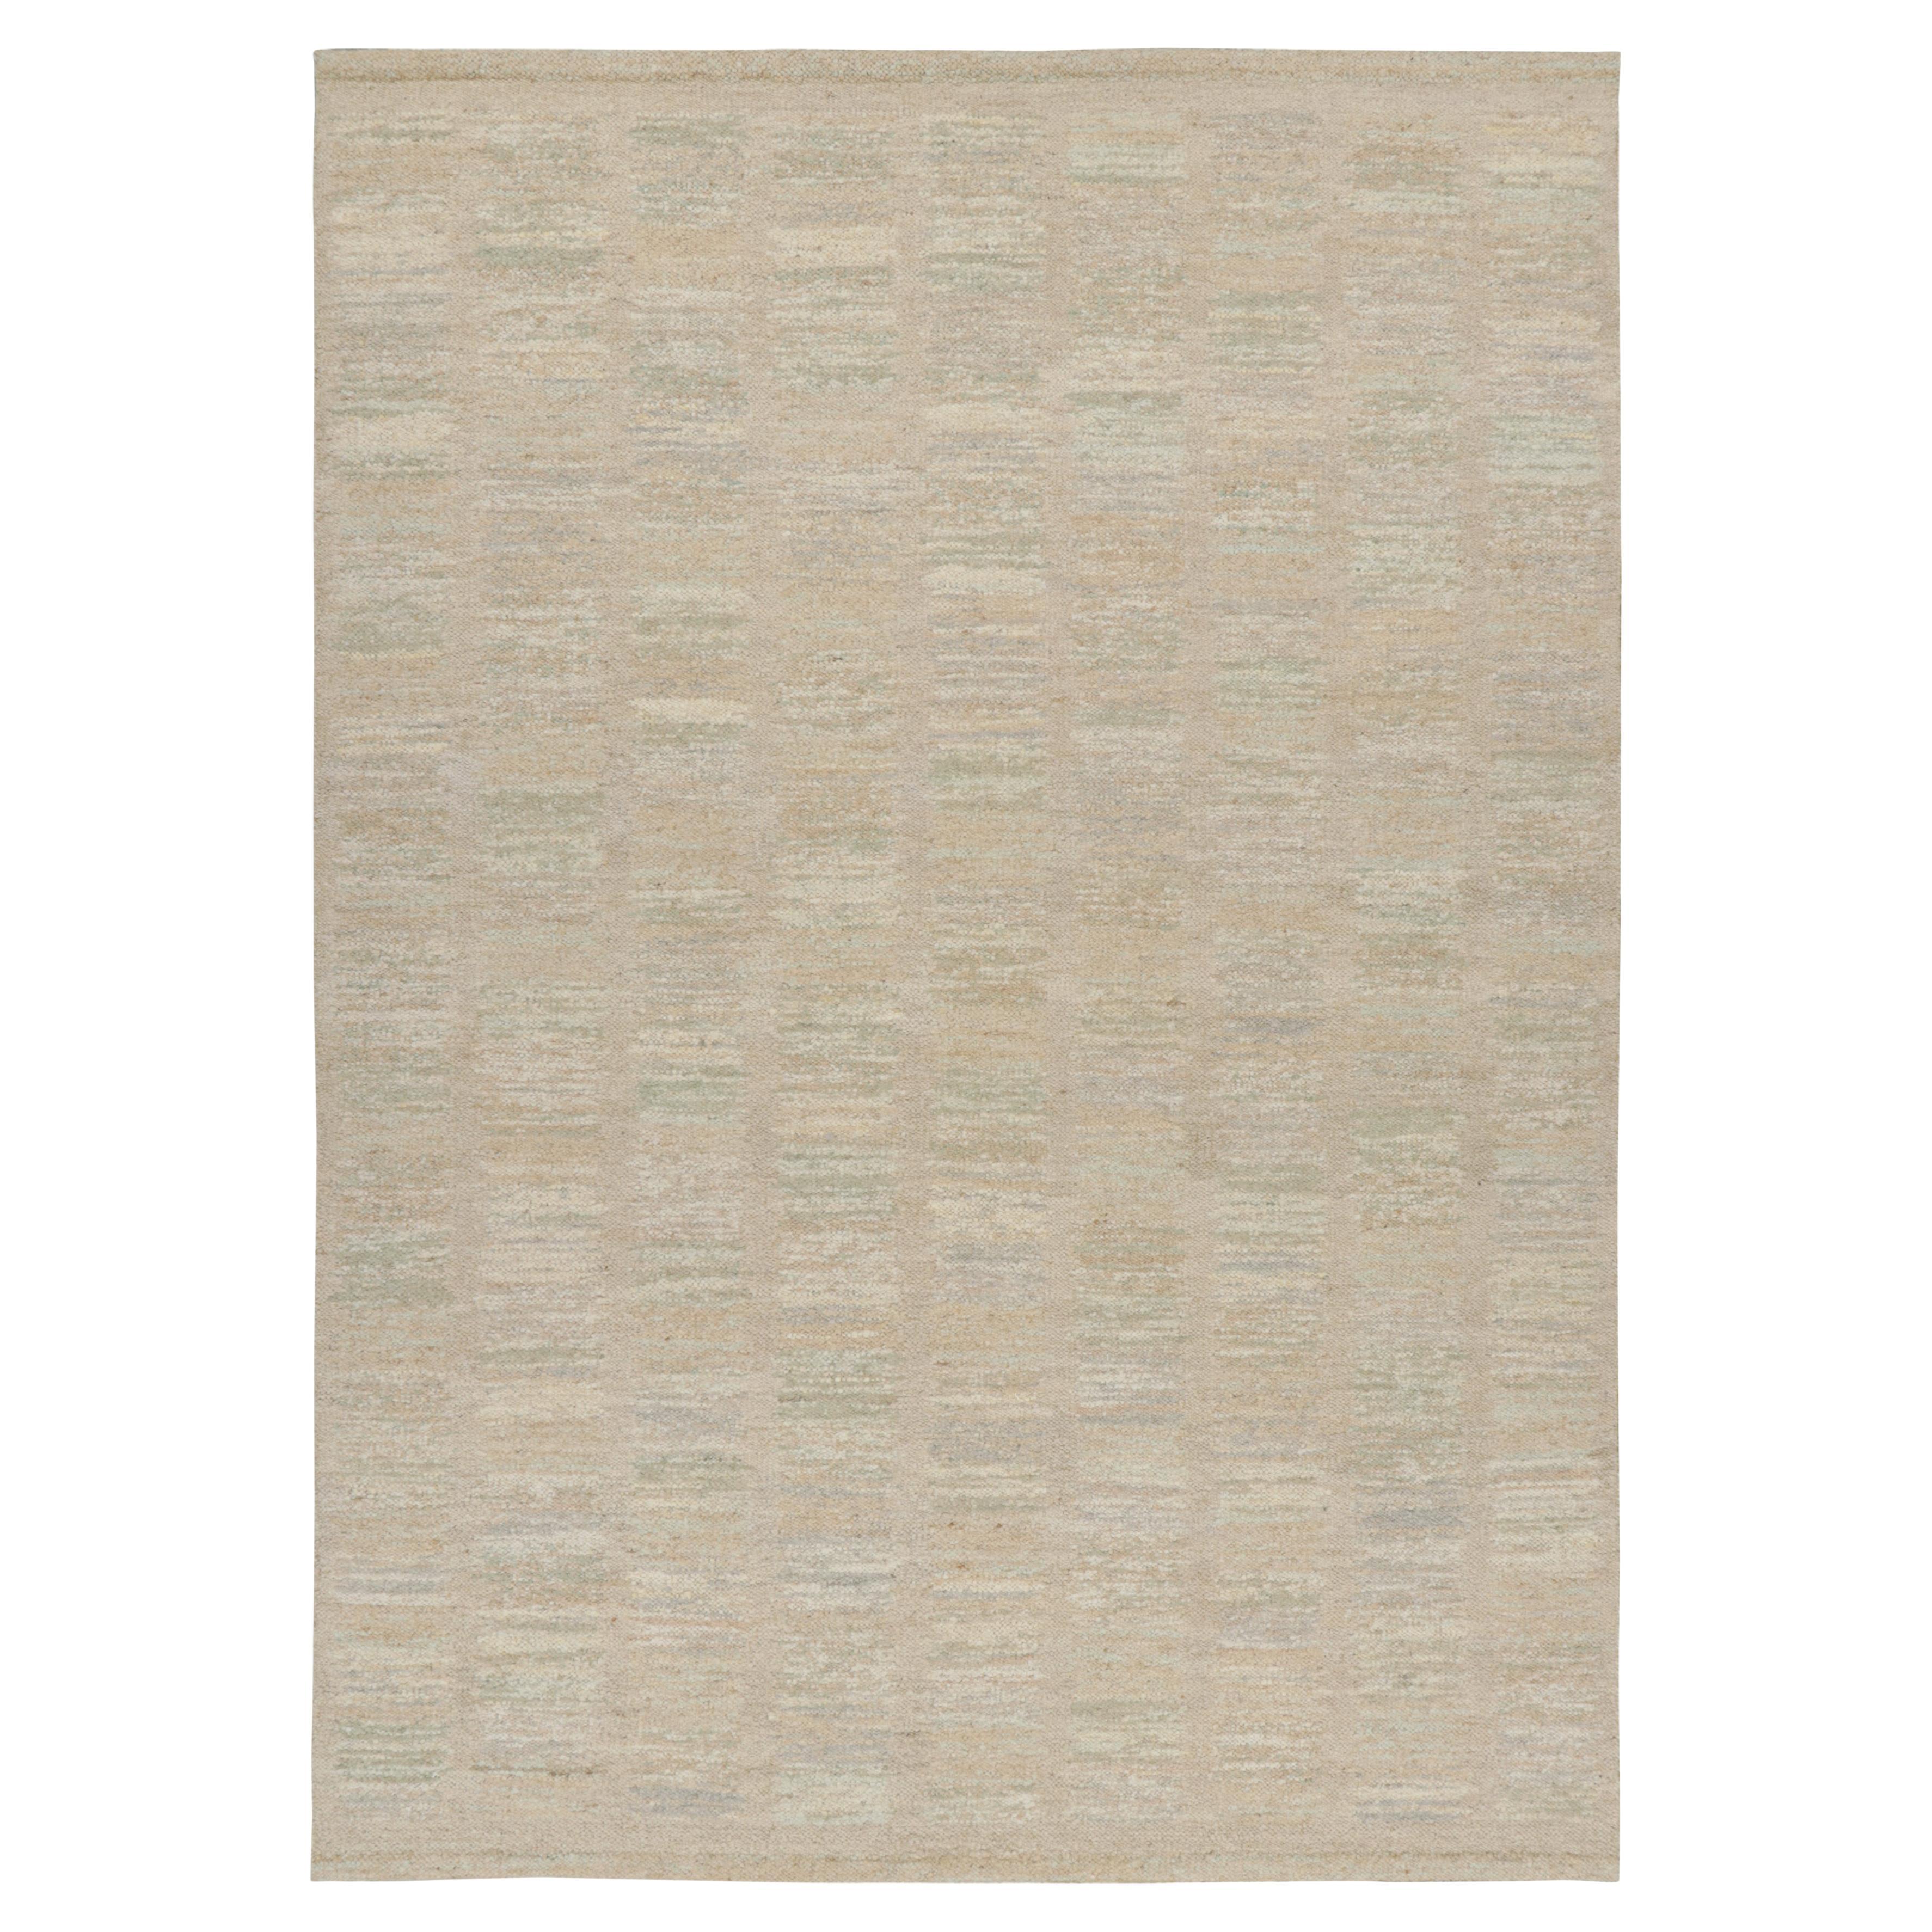 Rug & Kilim’s Scandinavian Style Rug in Beige, with Colorful Geometric Patterns For Sale